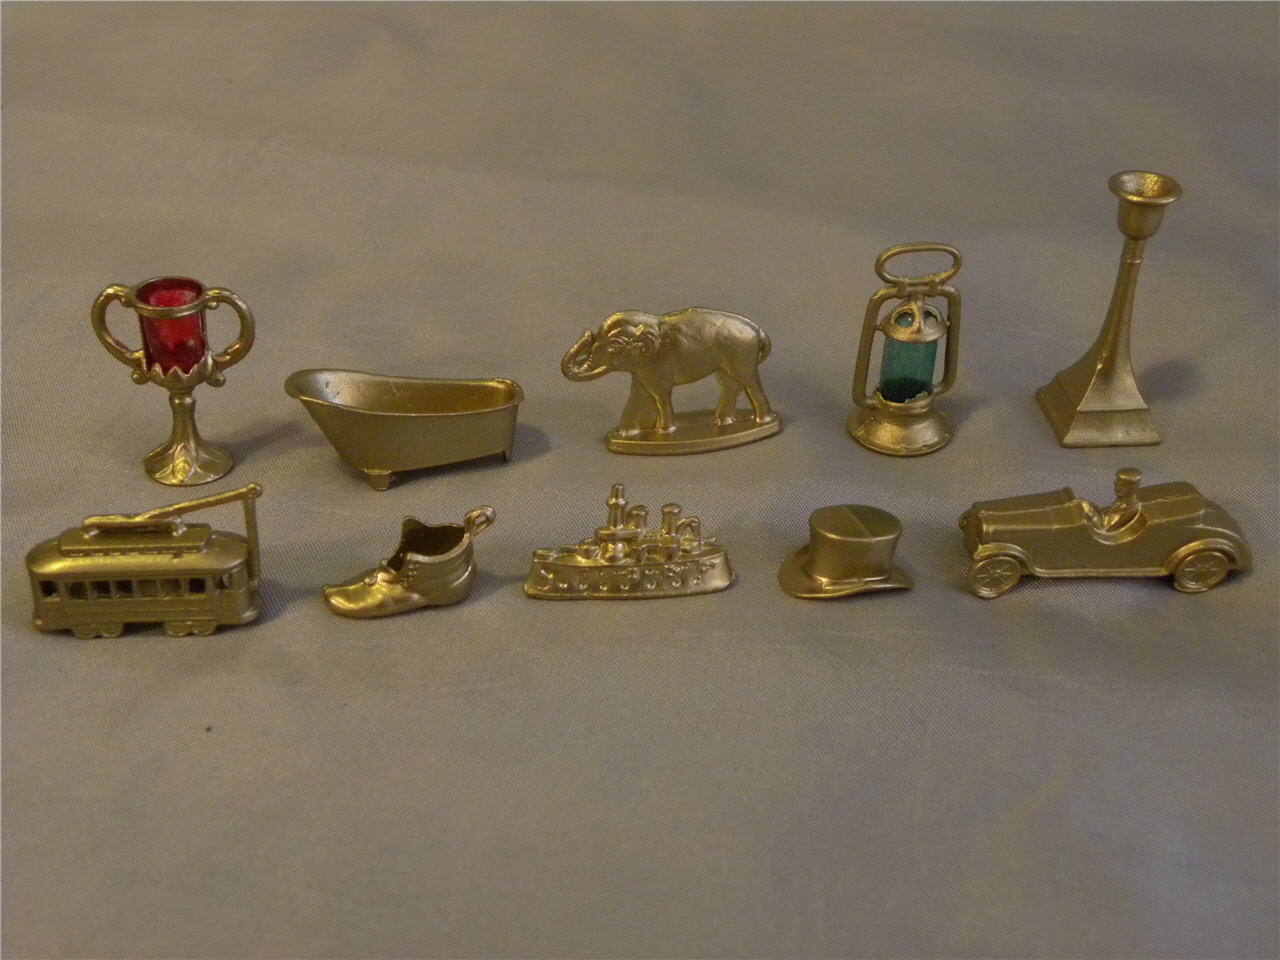 ms monopoly tokens